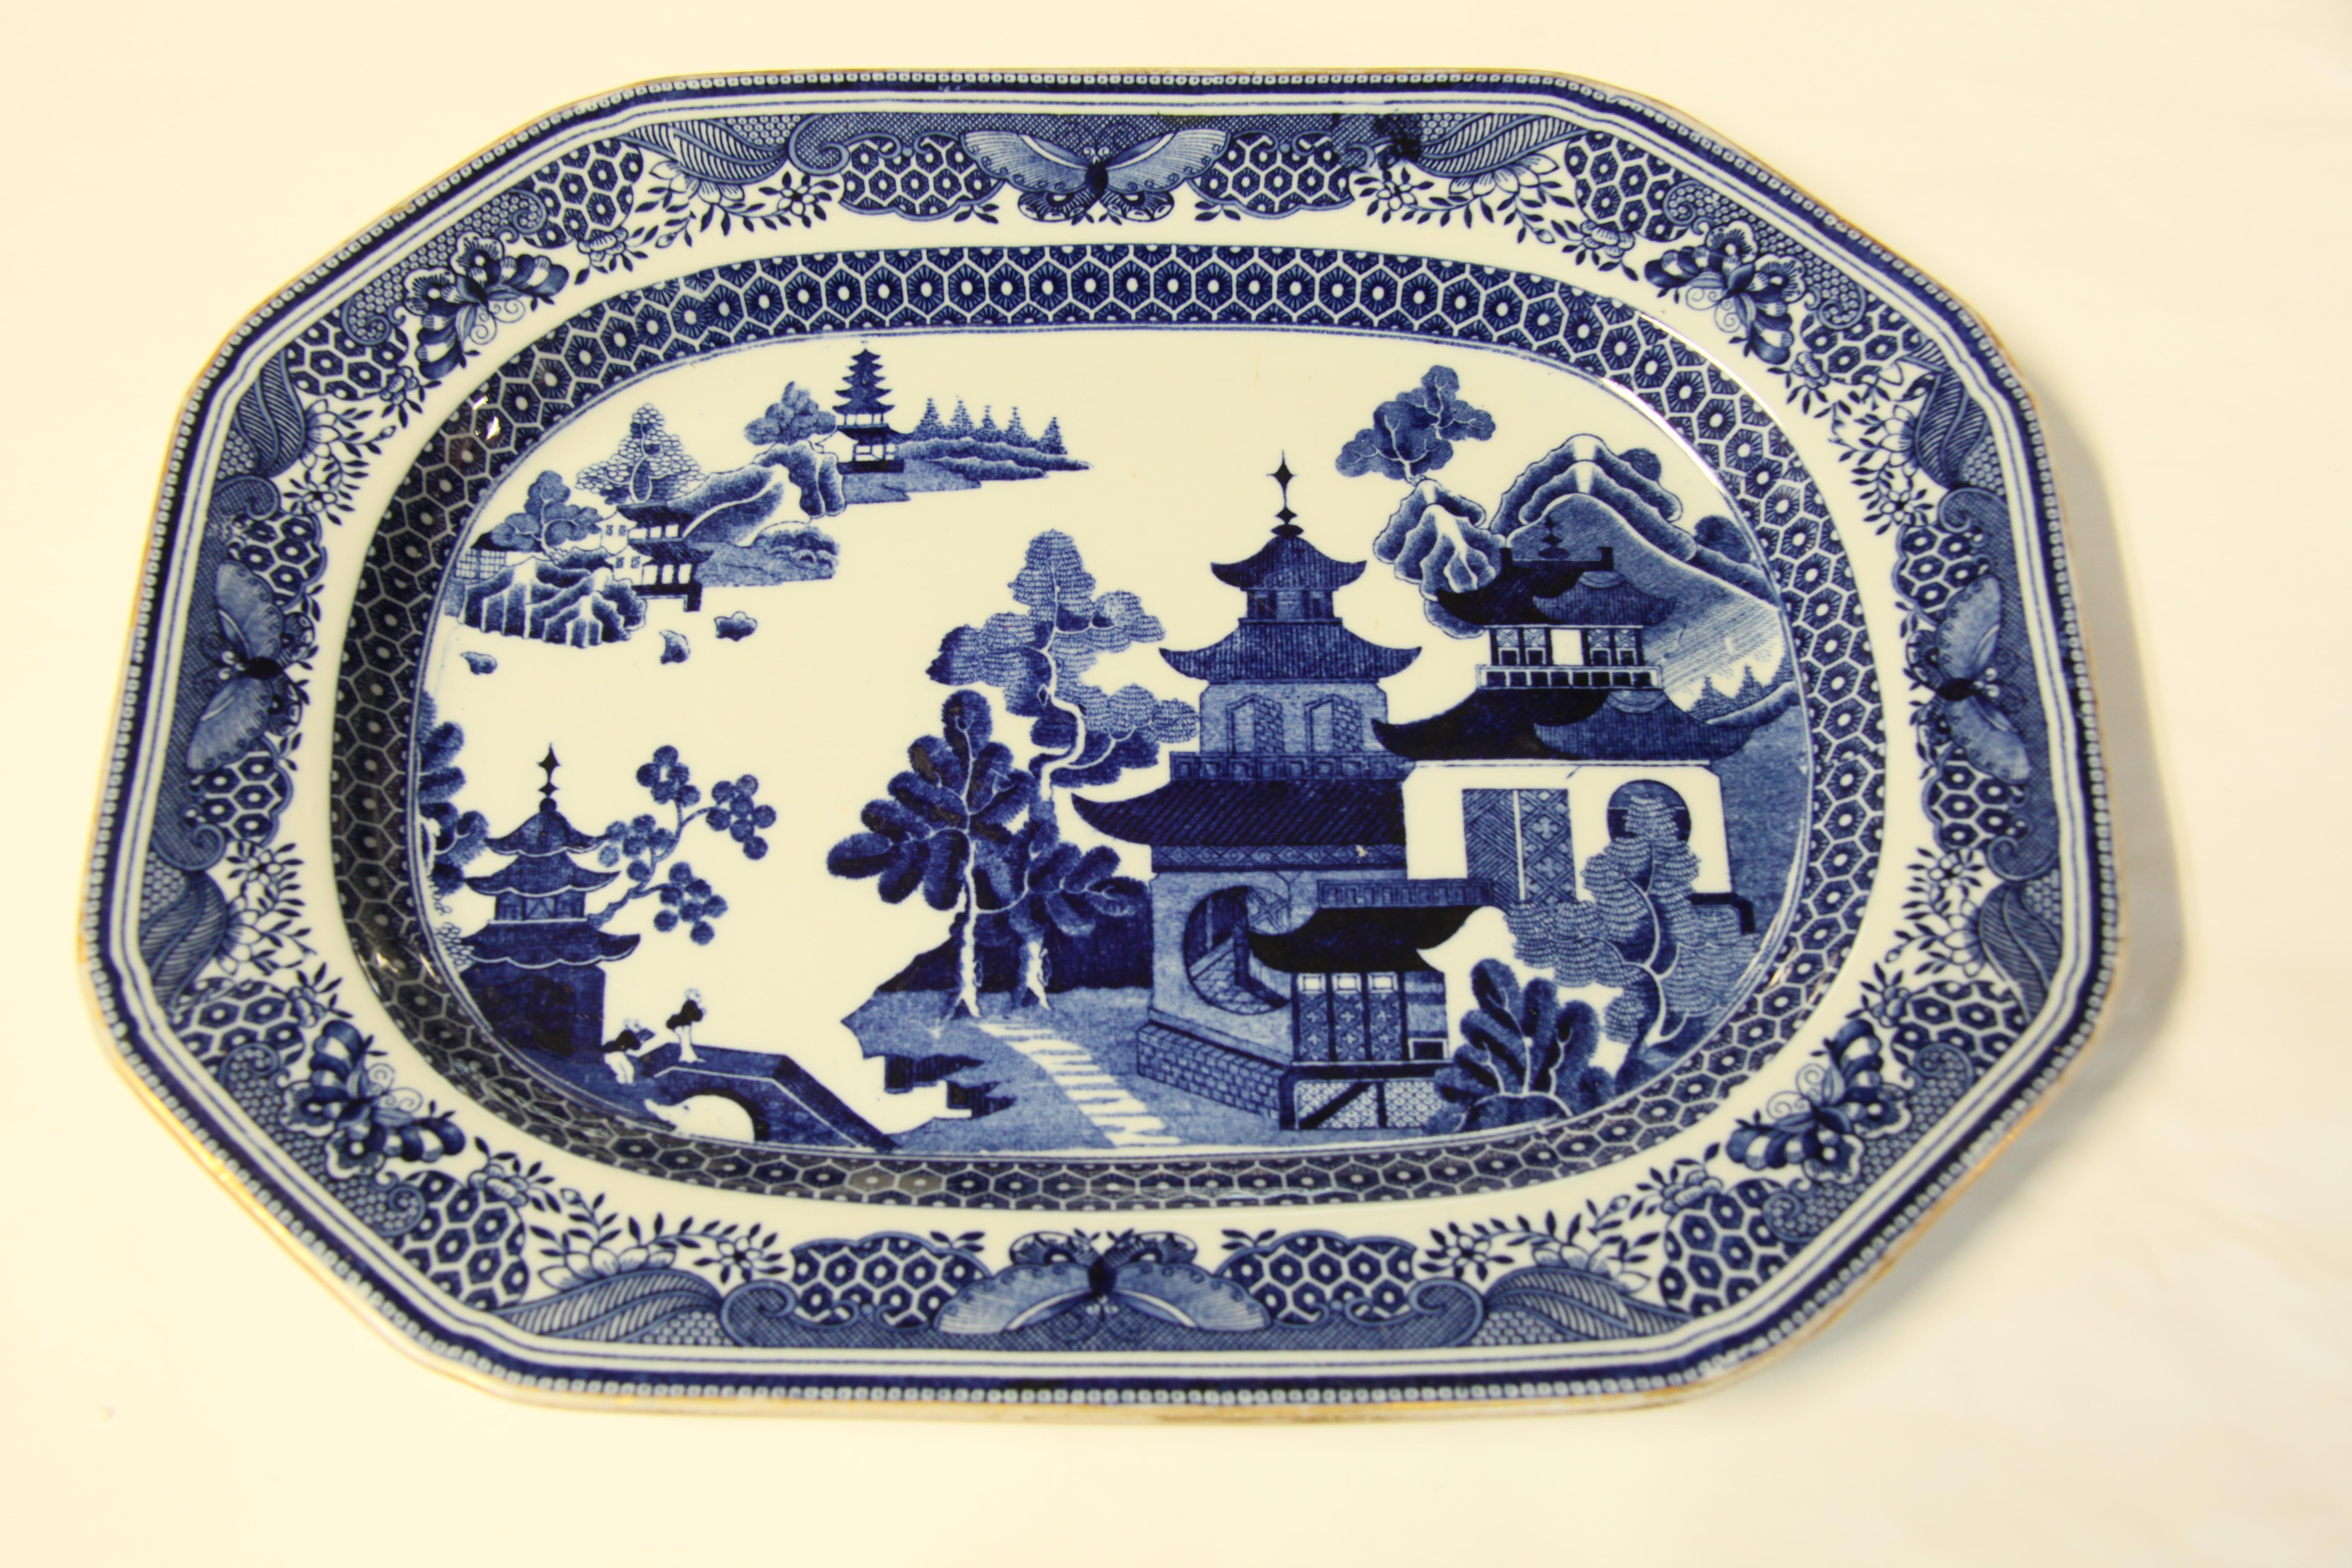 English Copeland Spode blue and white platter, the border inside the gilded edge has a variety of butterflies along with stylized flowers and foliage;  the main body features typical oriental motifs- trees, flowers, bridge, small and large pagodas .